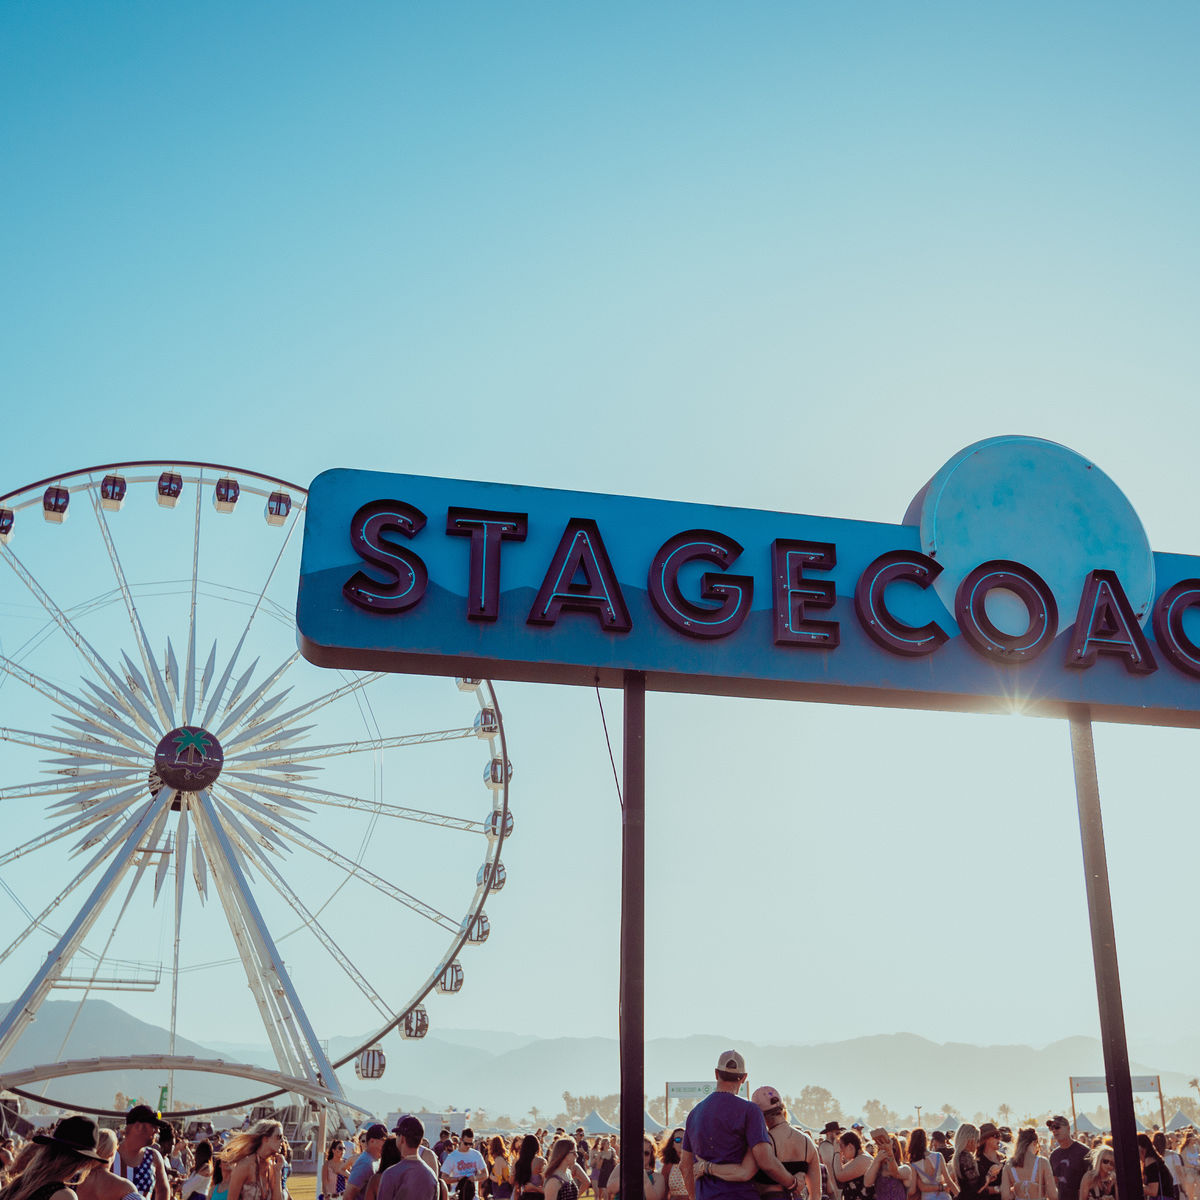 Image from behind of a performer playing the guitar and jumping in the air with the crowd and ferris wheel in front of him at Stagecoach